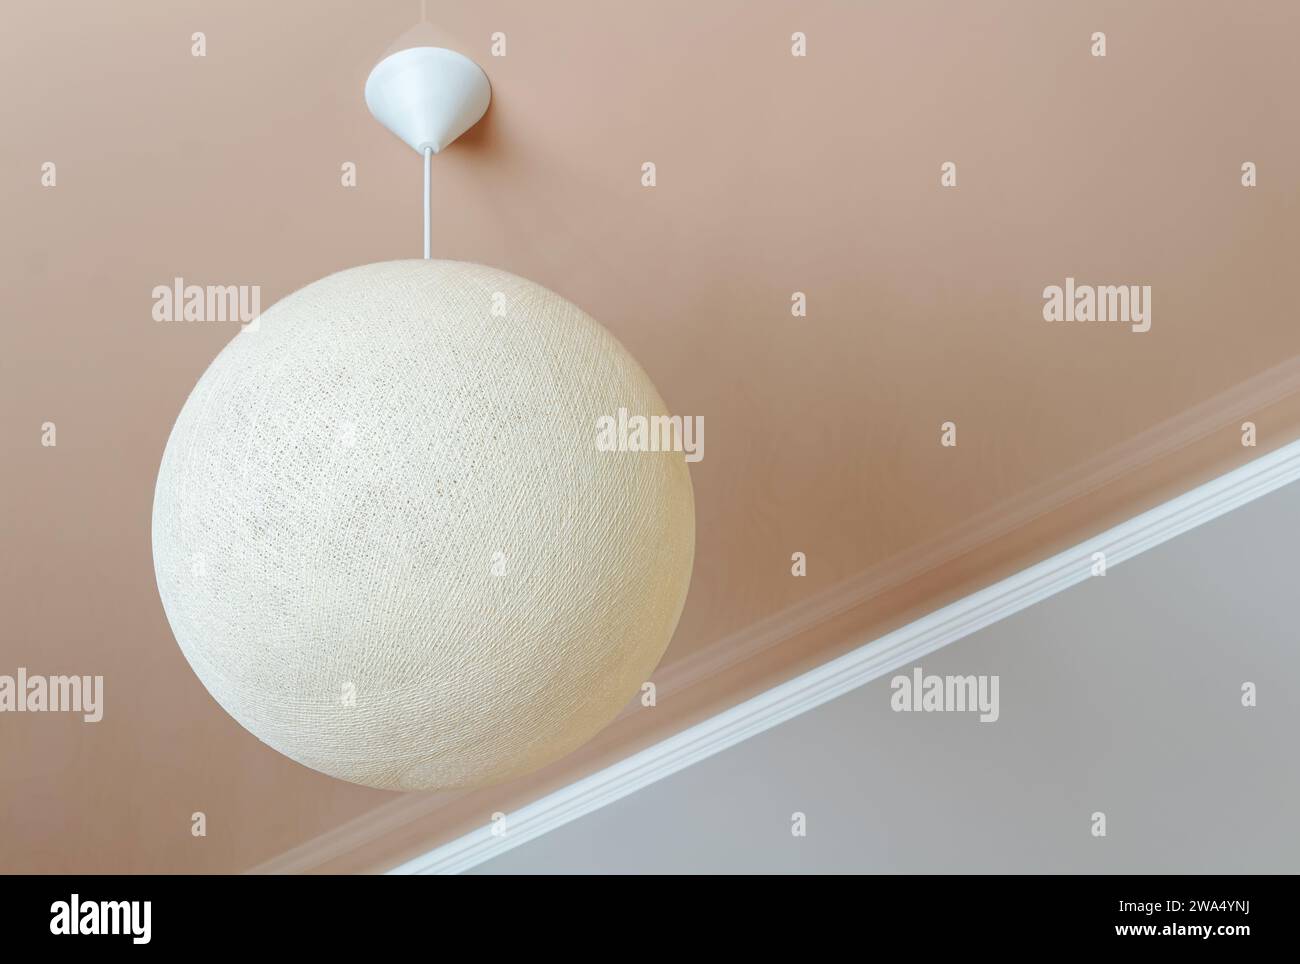 Ceiling lamp in the form of a wicker ball. Minimalist room interior. Stock Photo